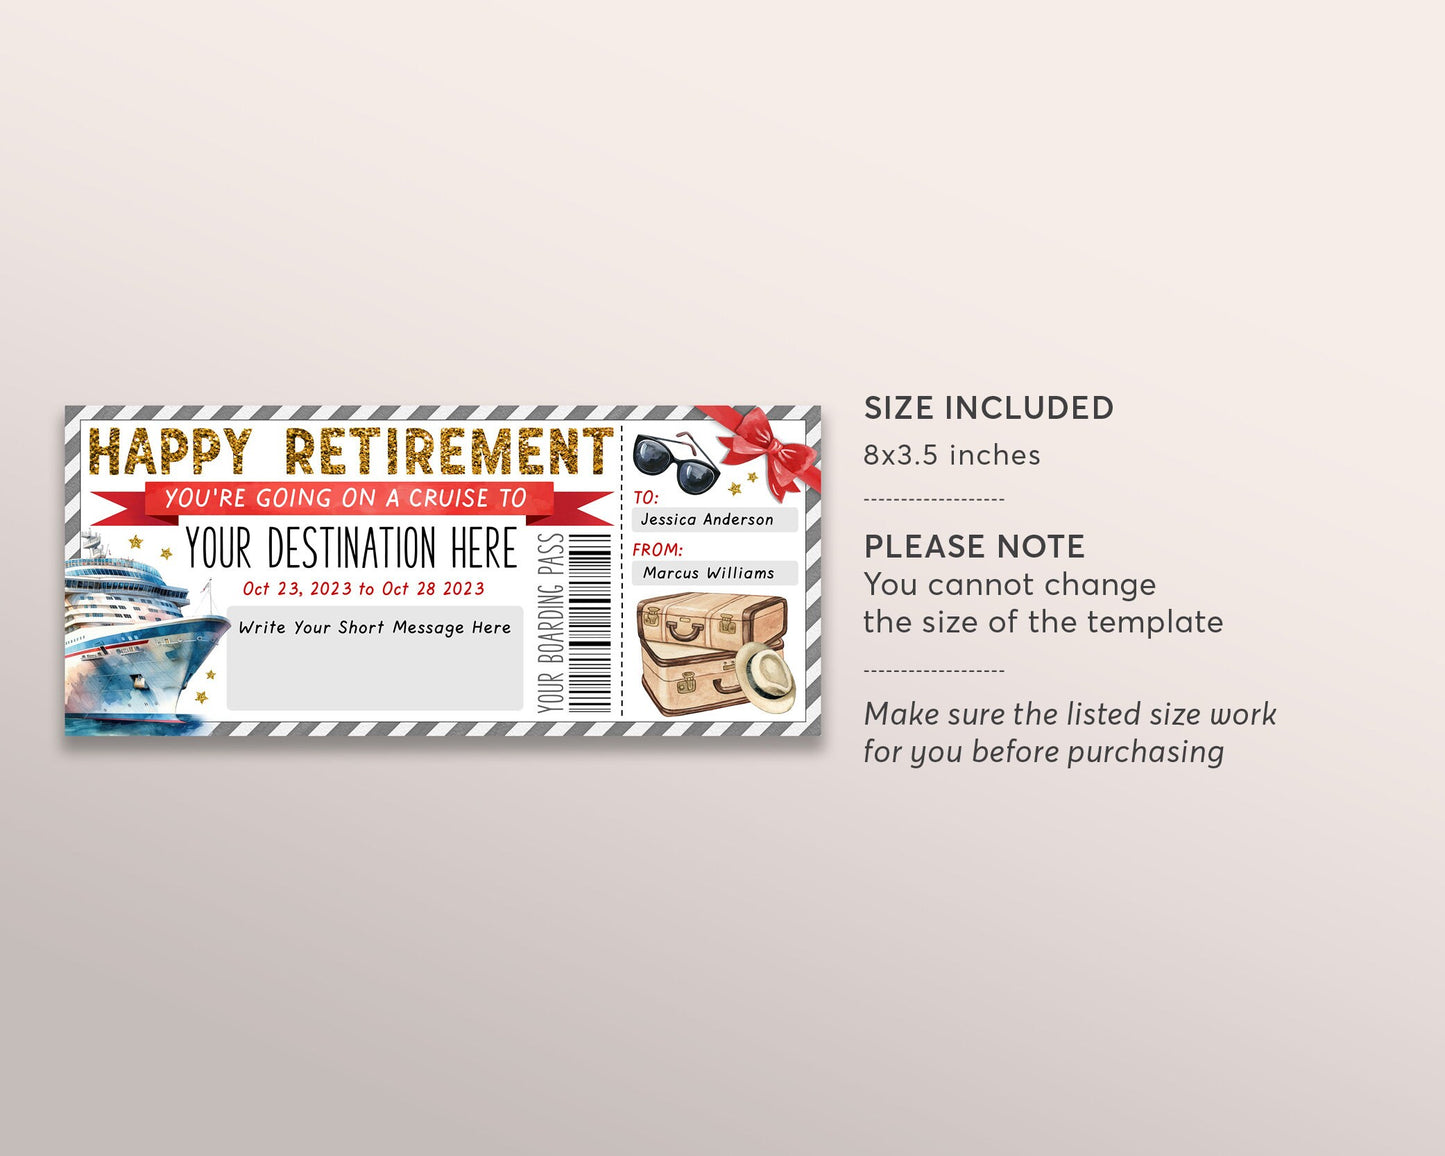 Retirement Cruise Boarding Pass Ticket Editable Template, Surprise Cruise Ship Gift Voucher For Retiree, Vacation Travel Ticket Trip Reveal